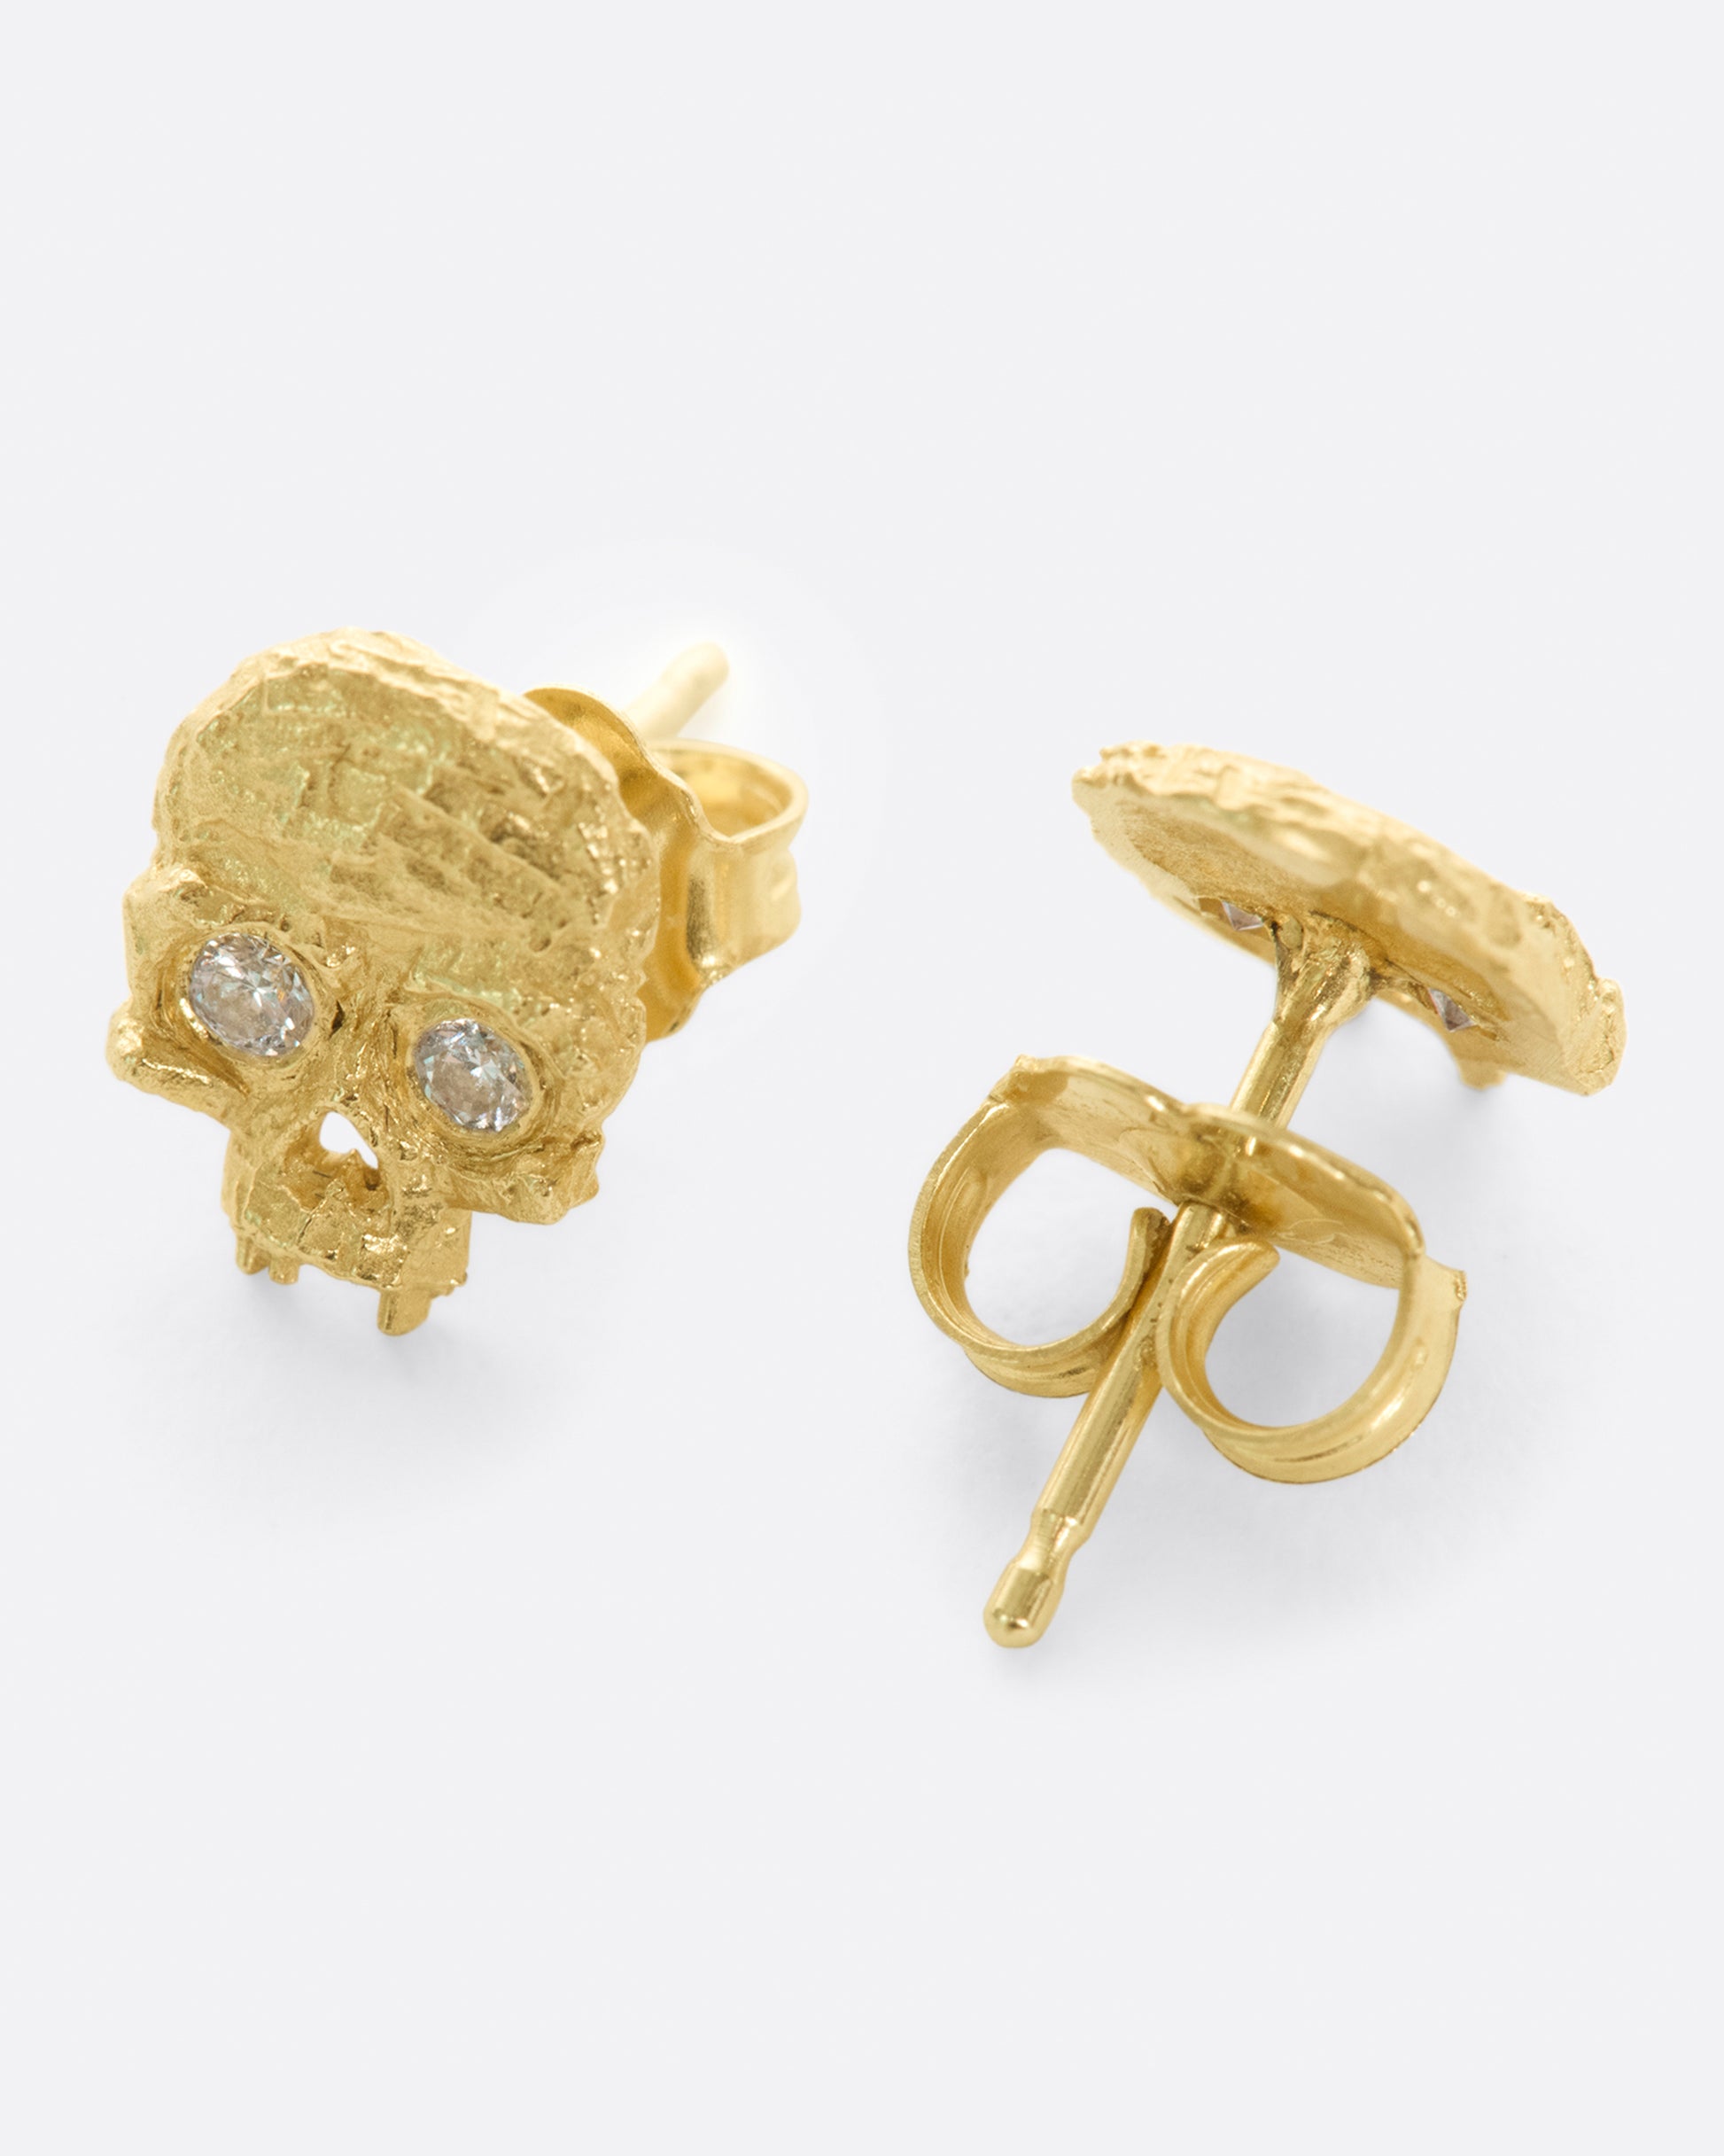 A pair of yellow gold textured skull stud earrings with diamond eyes, shown from the side.